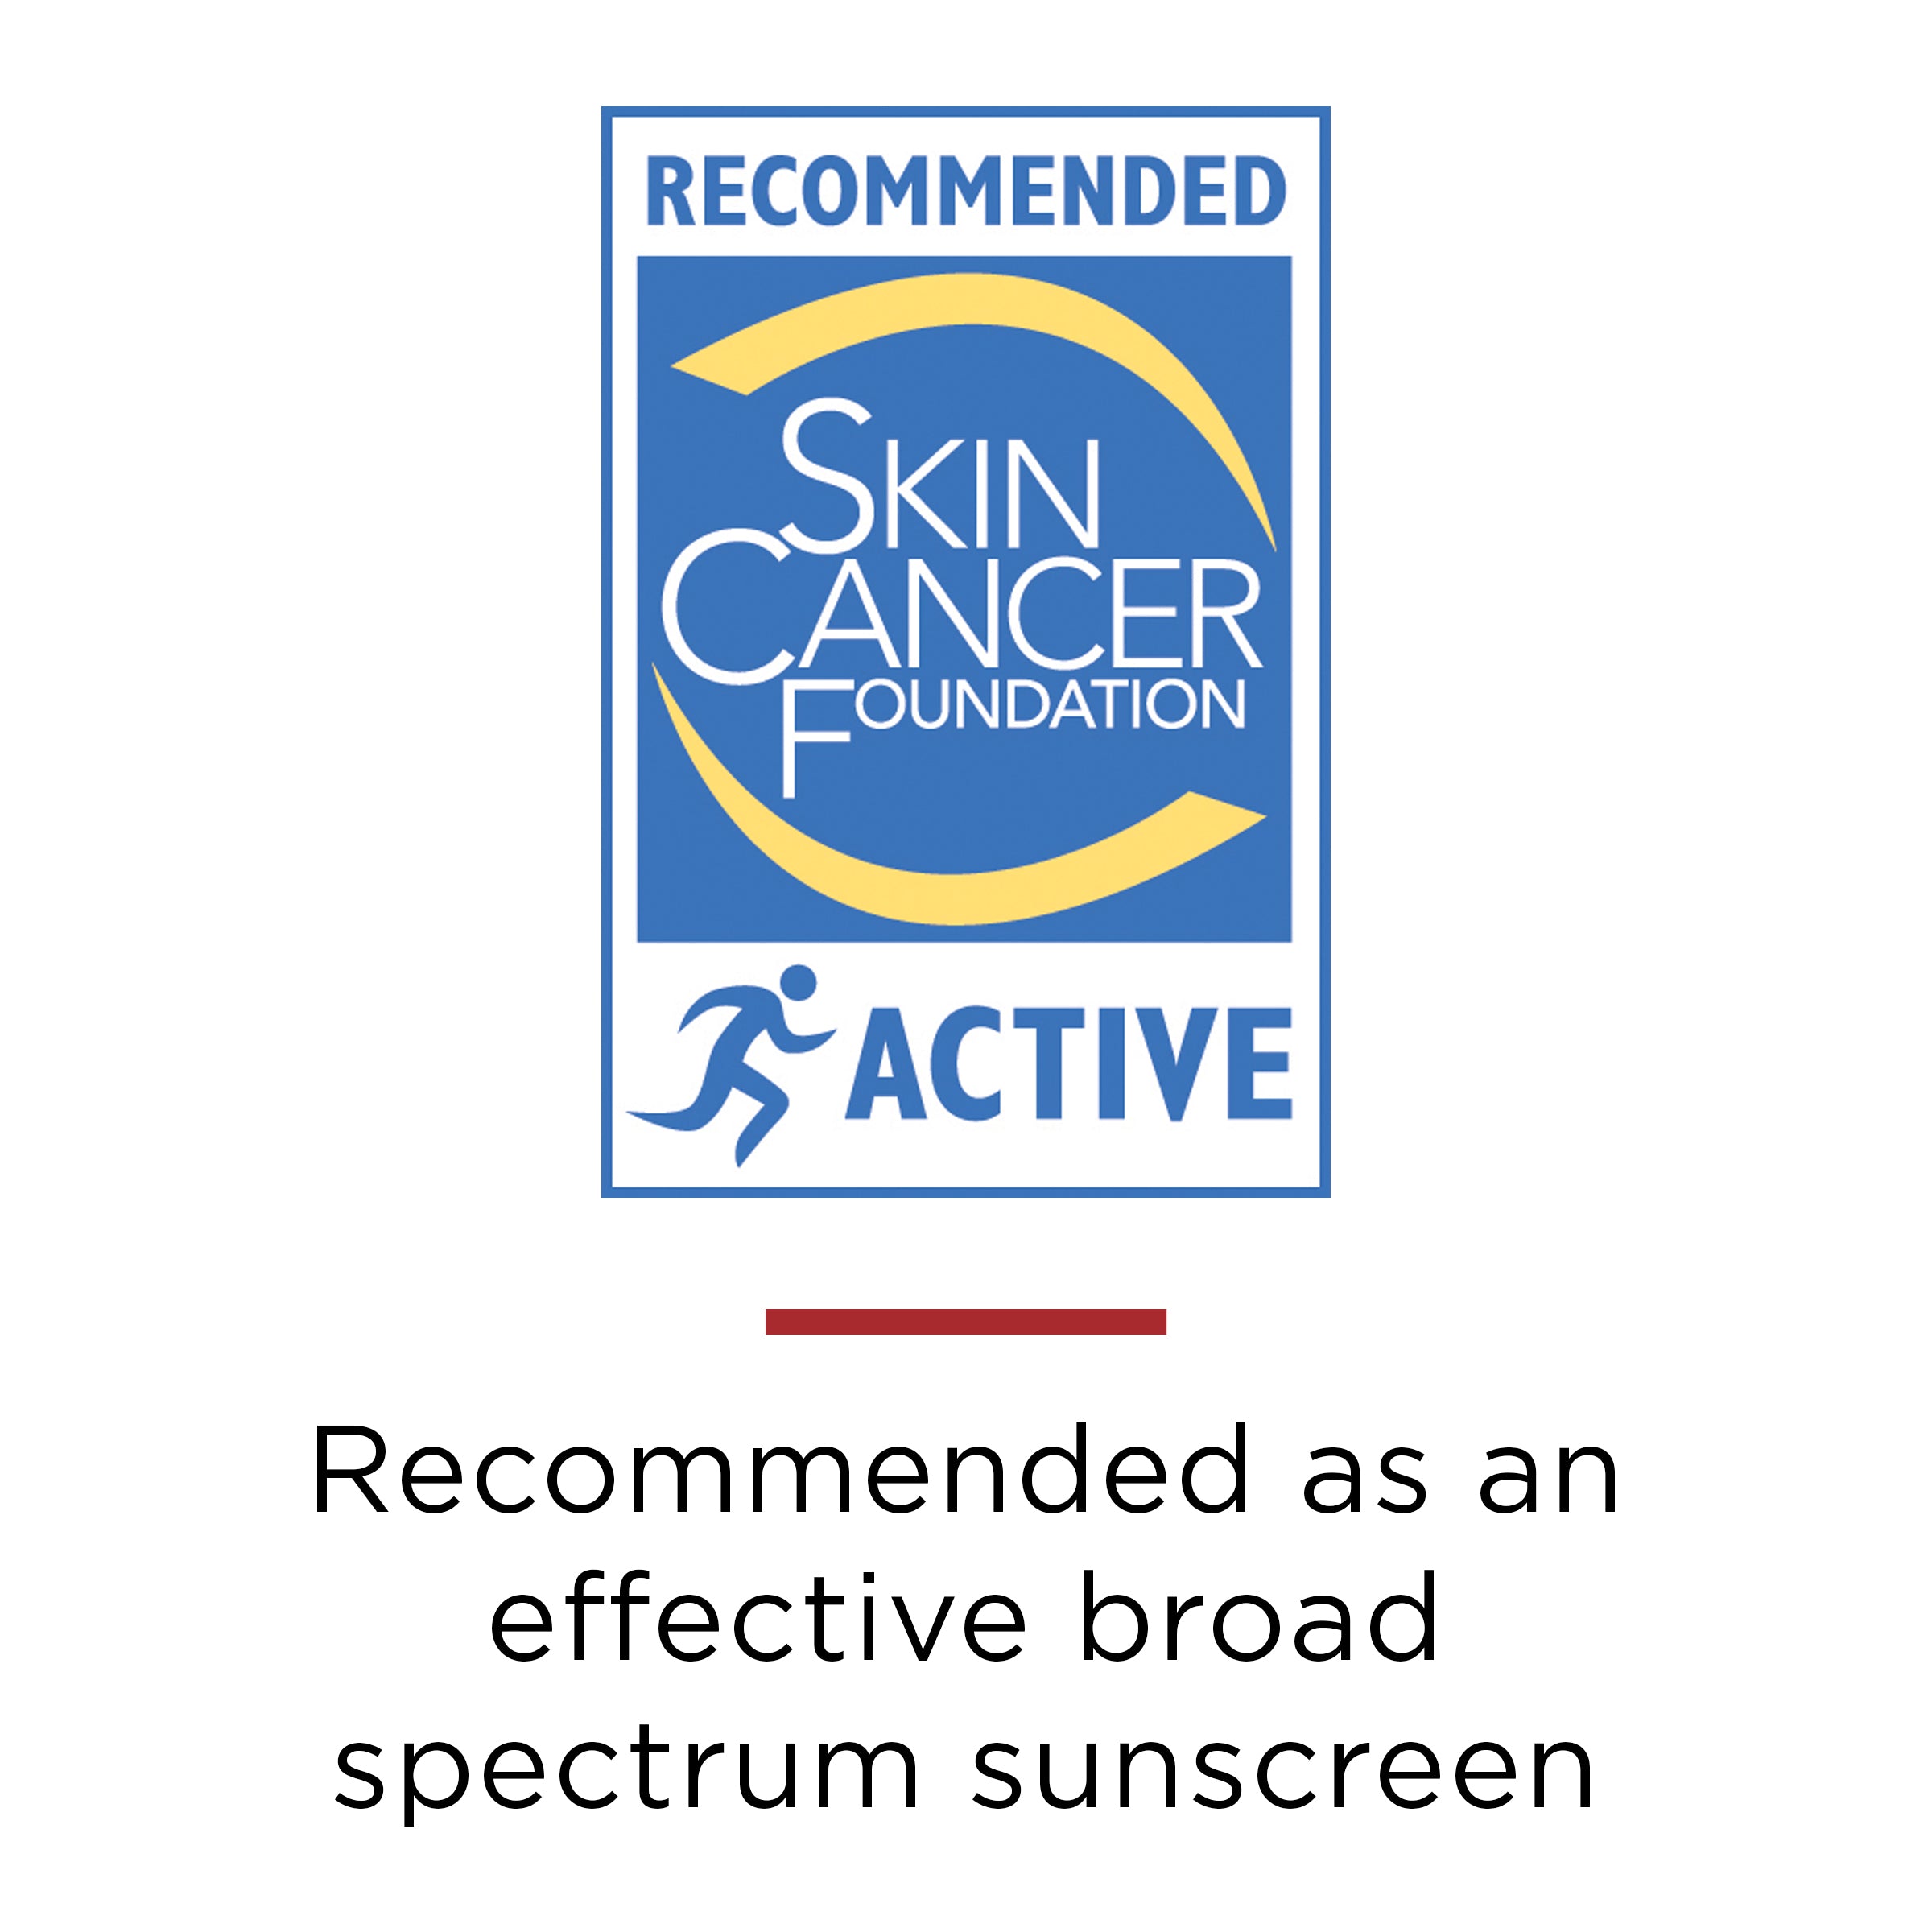 Skin Cancer Foundation - Recommended for Active Use